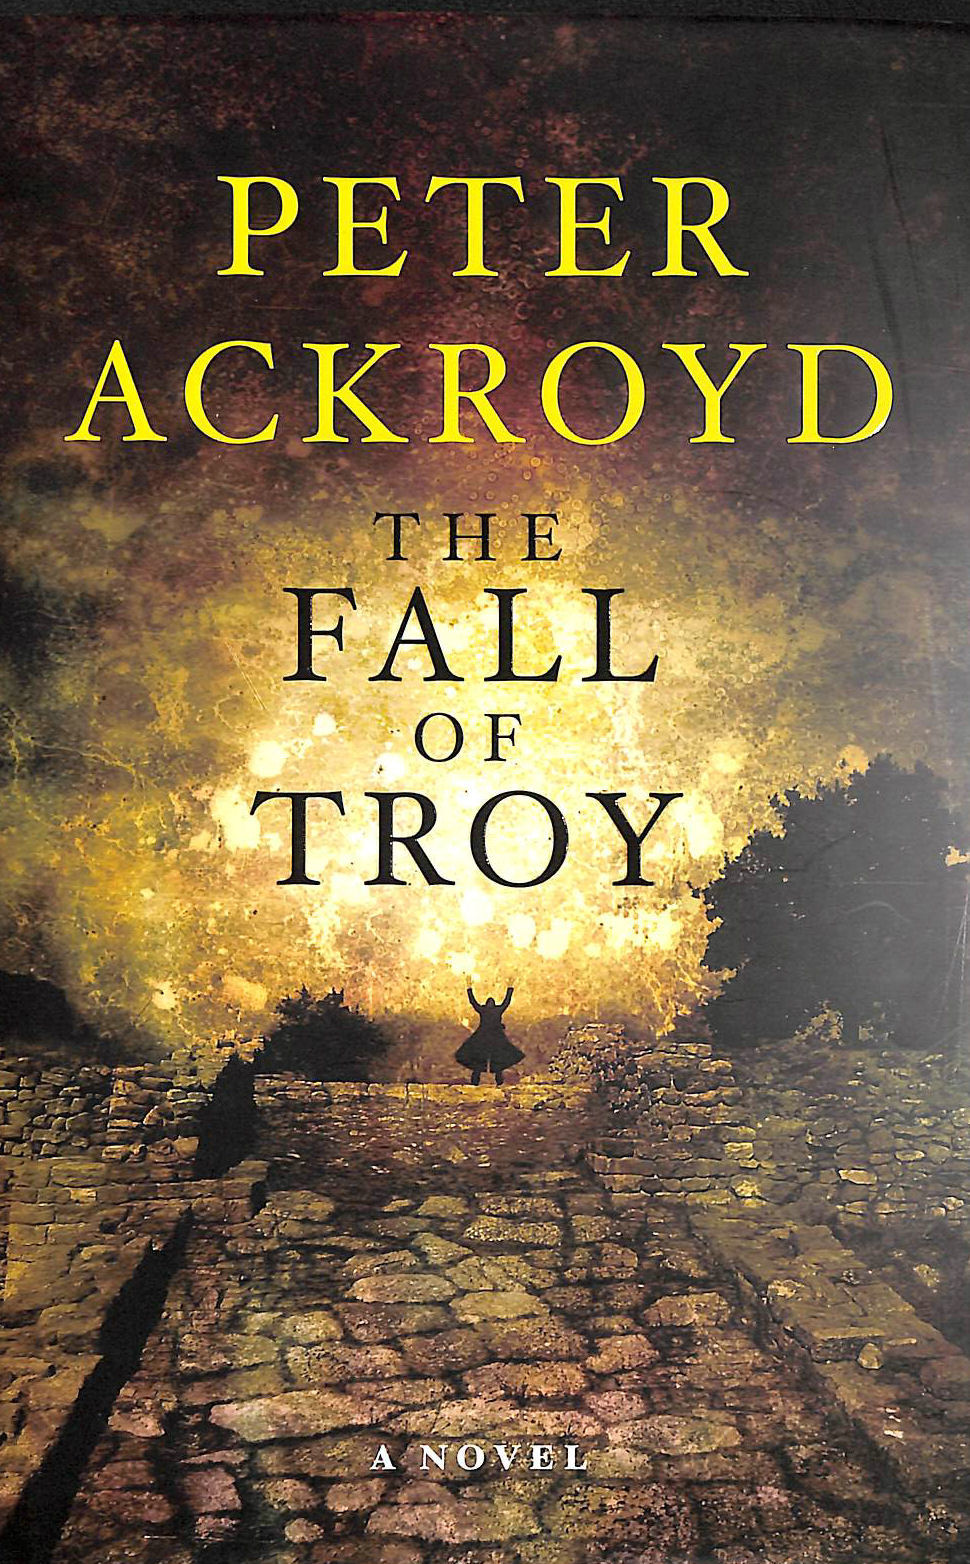 ACKROYD, PETER - The Fall of Troy